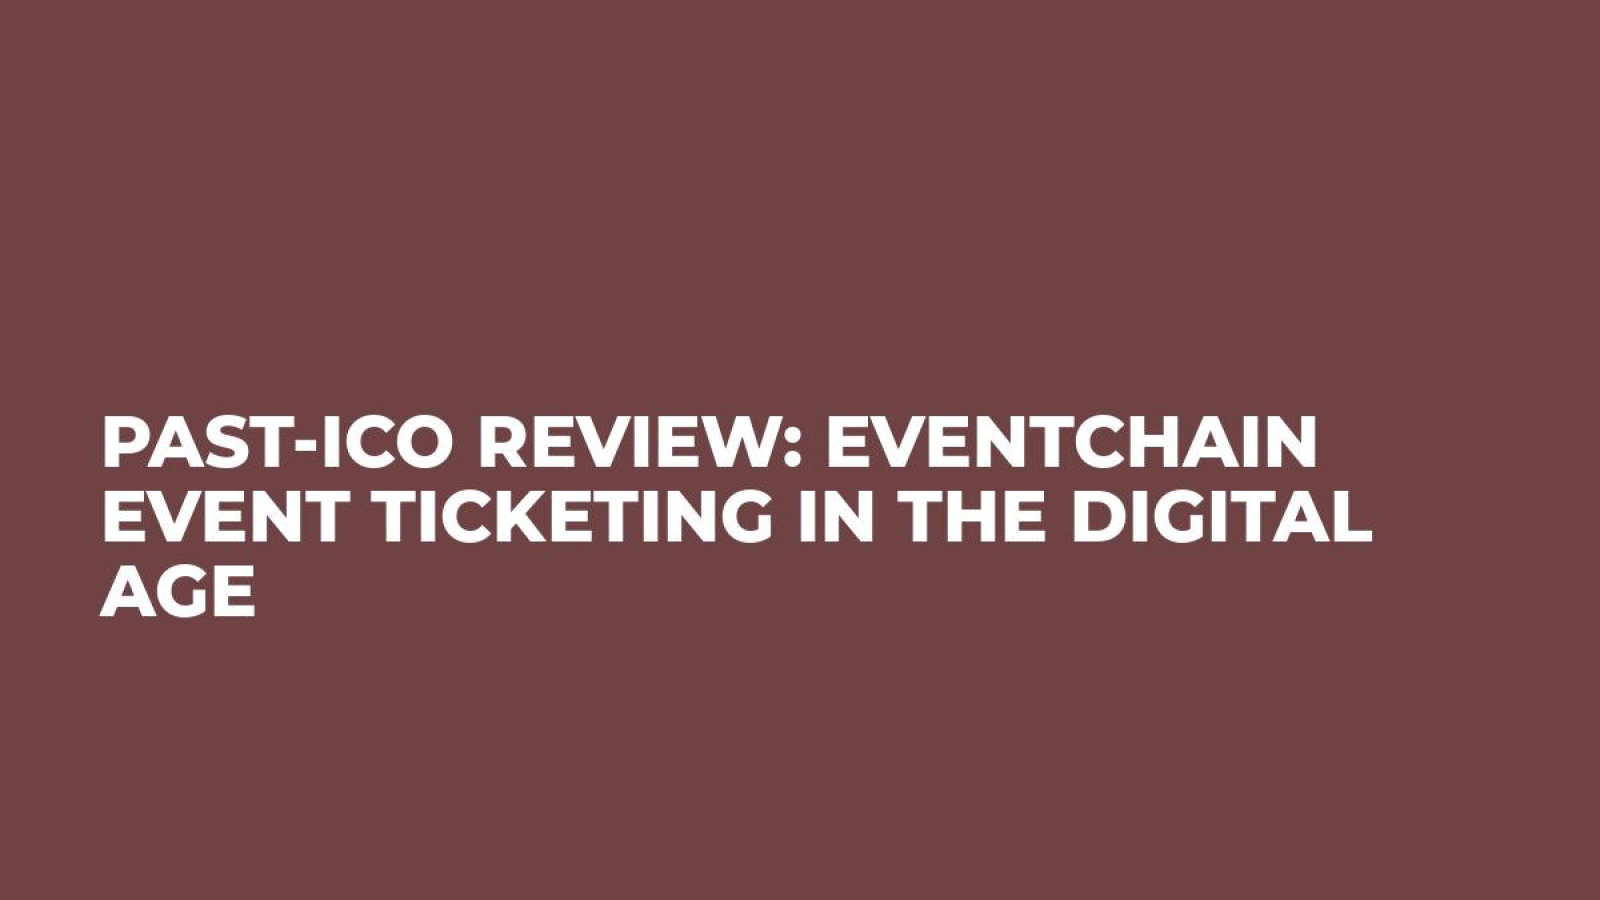 Past-ICO Review: Eventchain Event Ticketing in the Digital Age